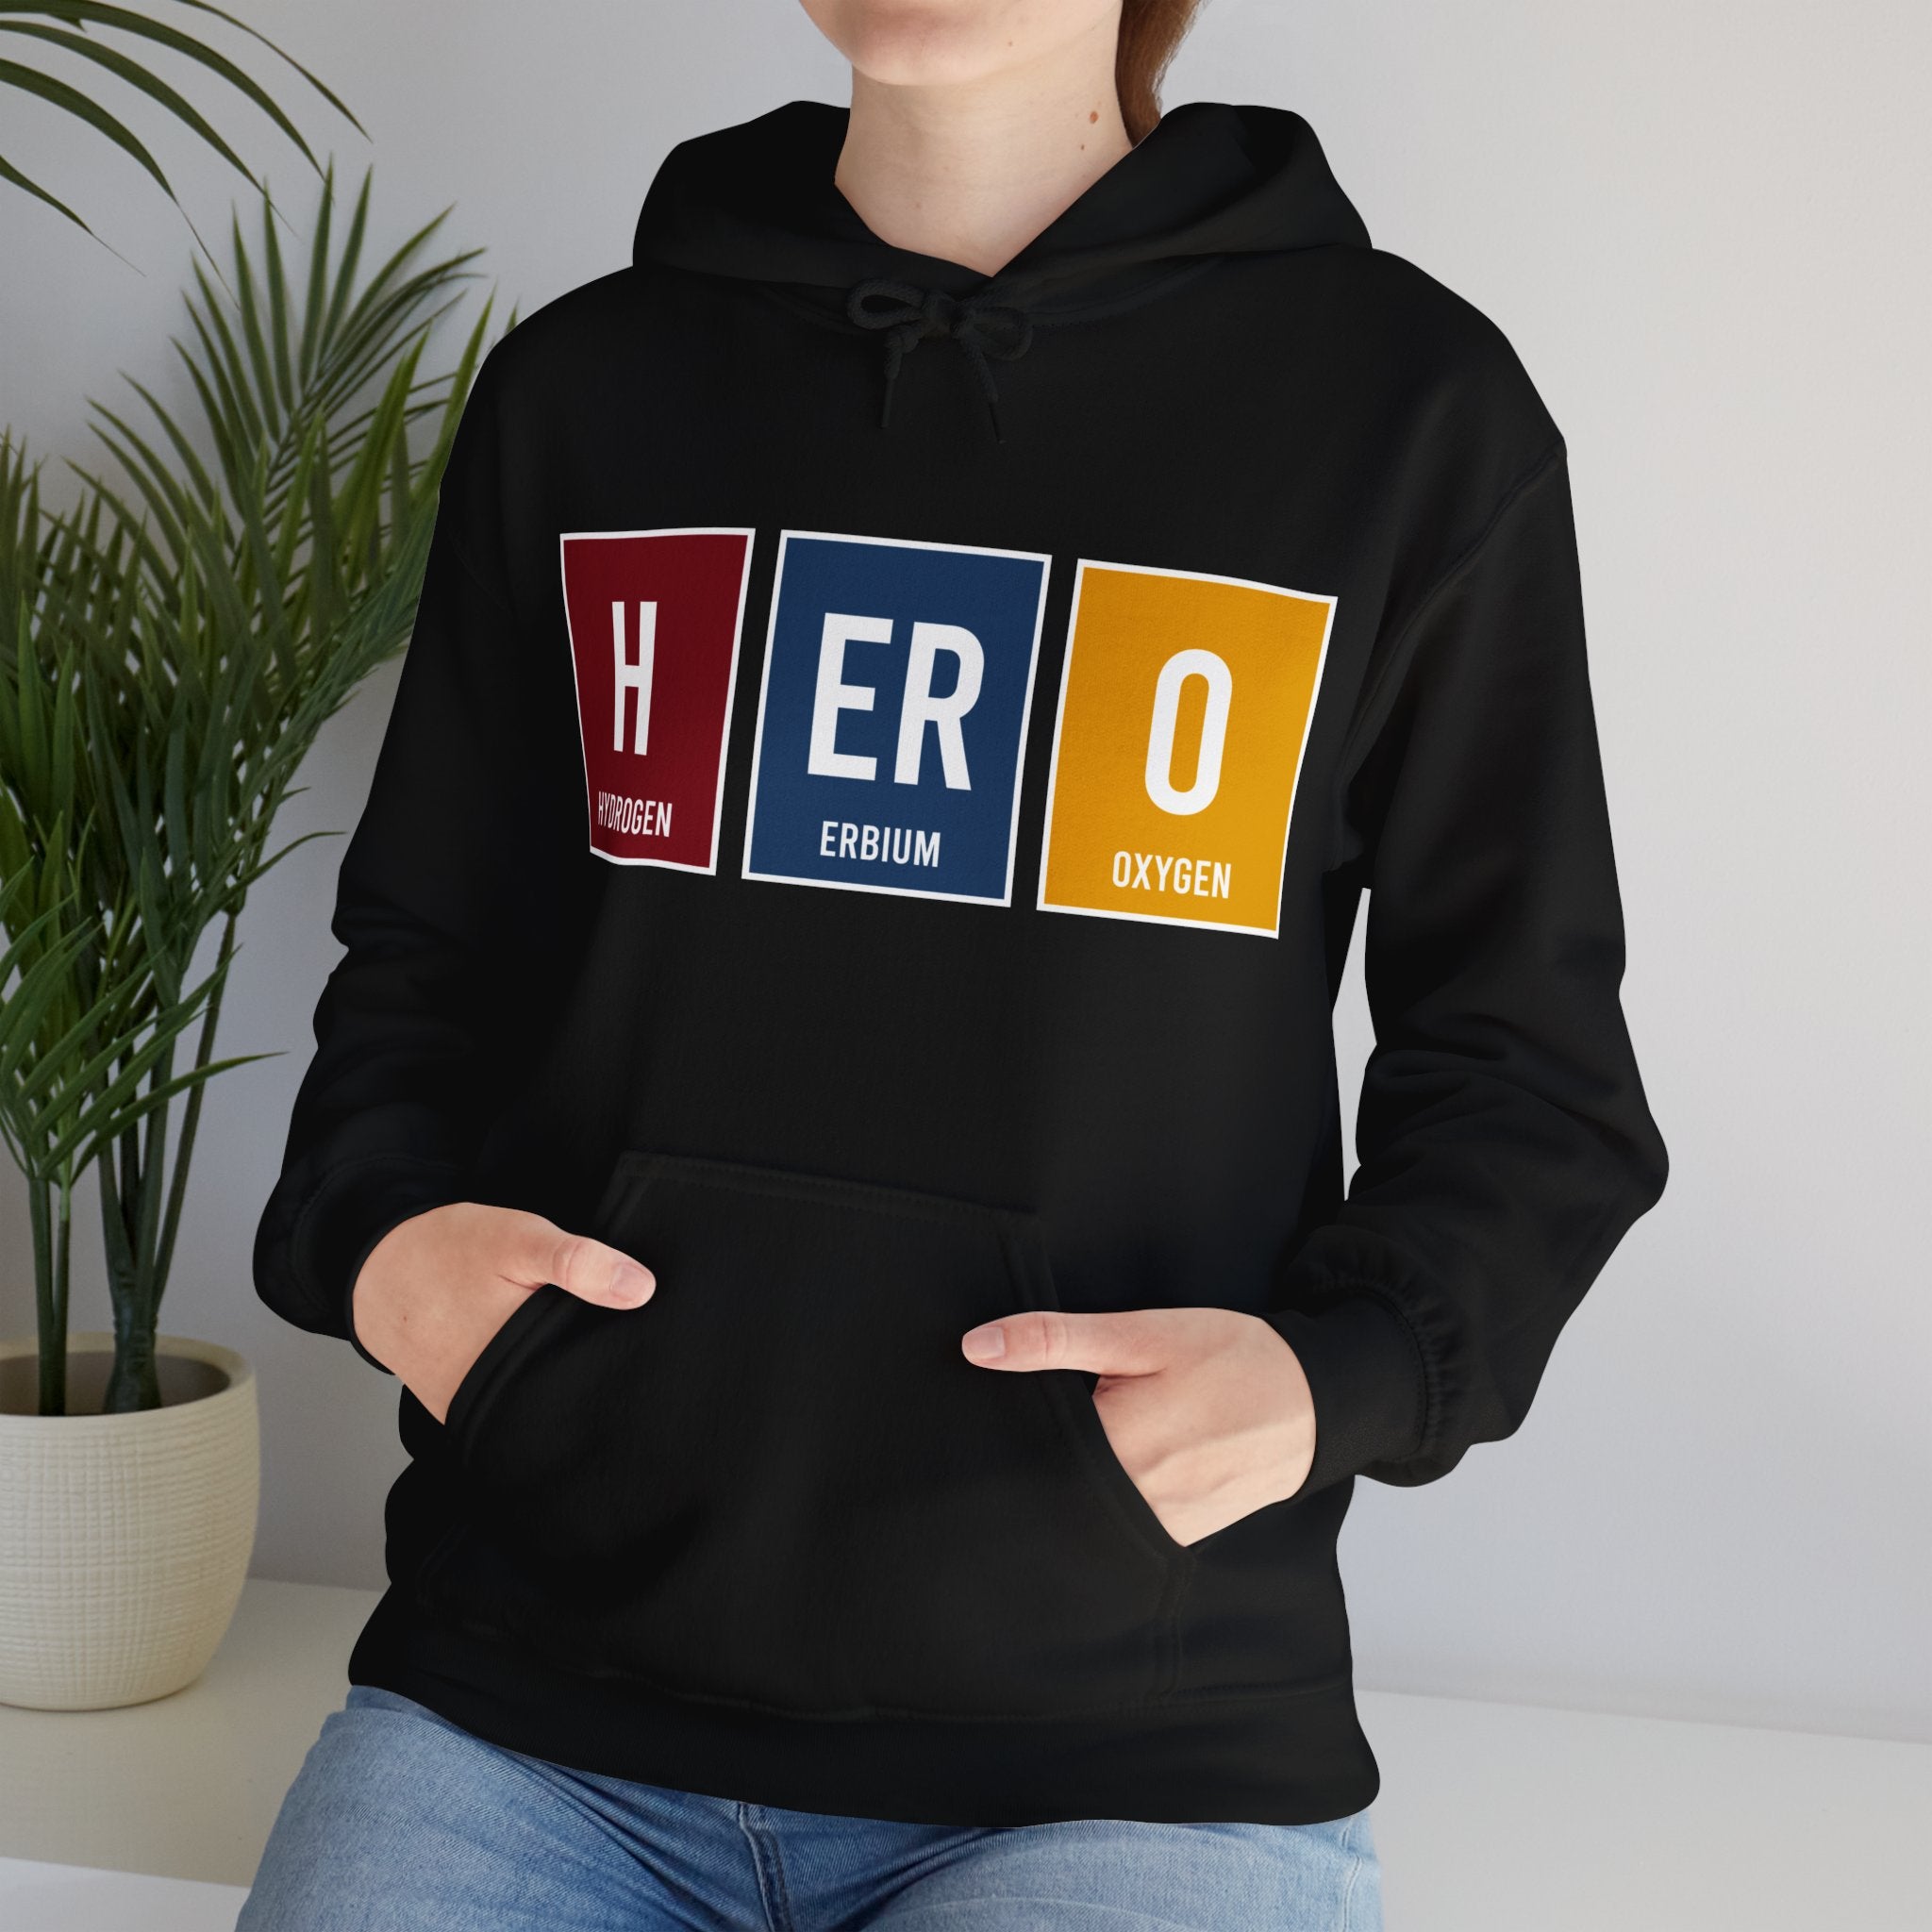 Person wearing a black HERO - Hooded Sweatshirt with the word "HERO" displayed using periodic table element symbols for Hydrogen, Erbium, and Oxygen. Hands are in the front pocket. Plant in the background underscores their quiet heroism.